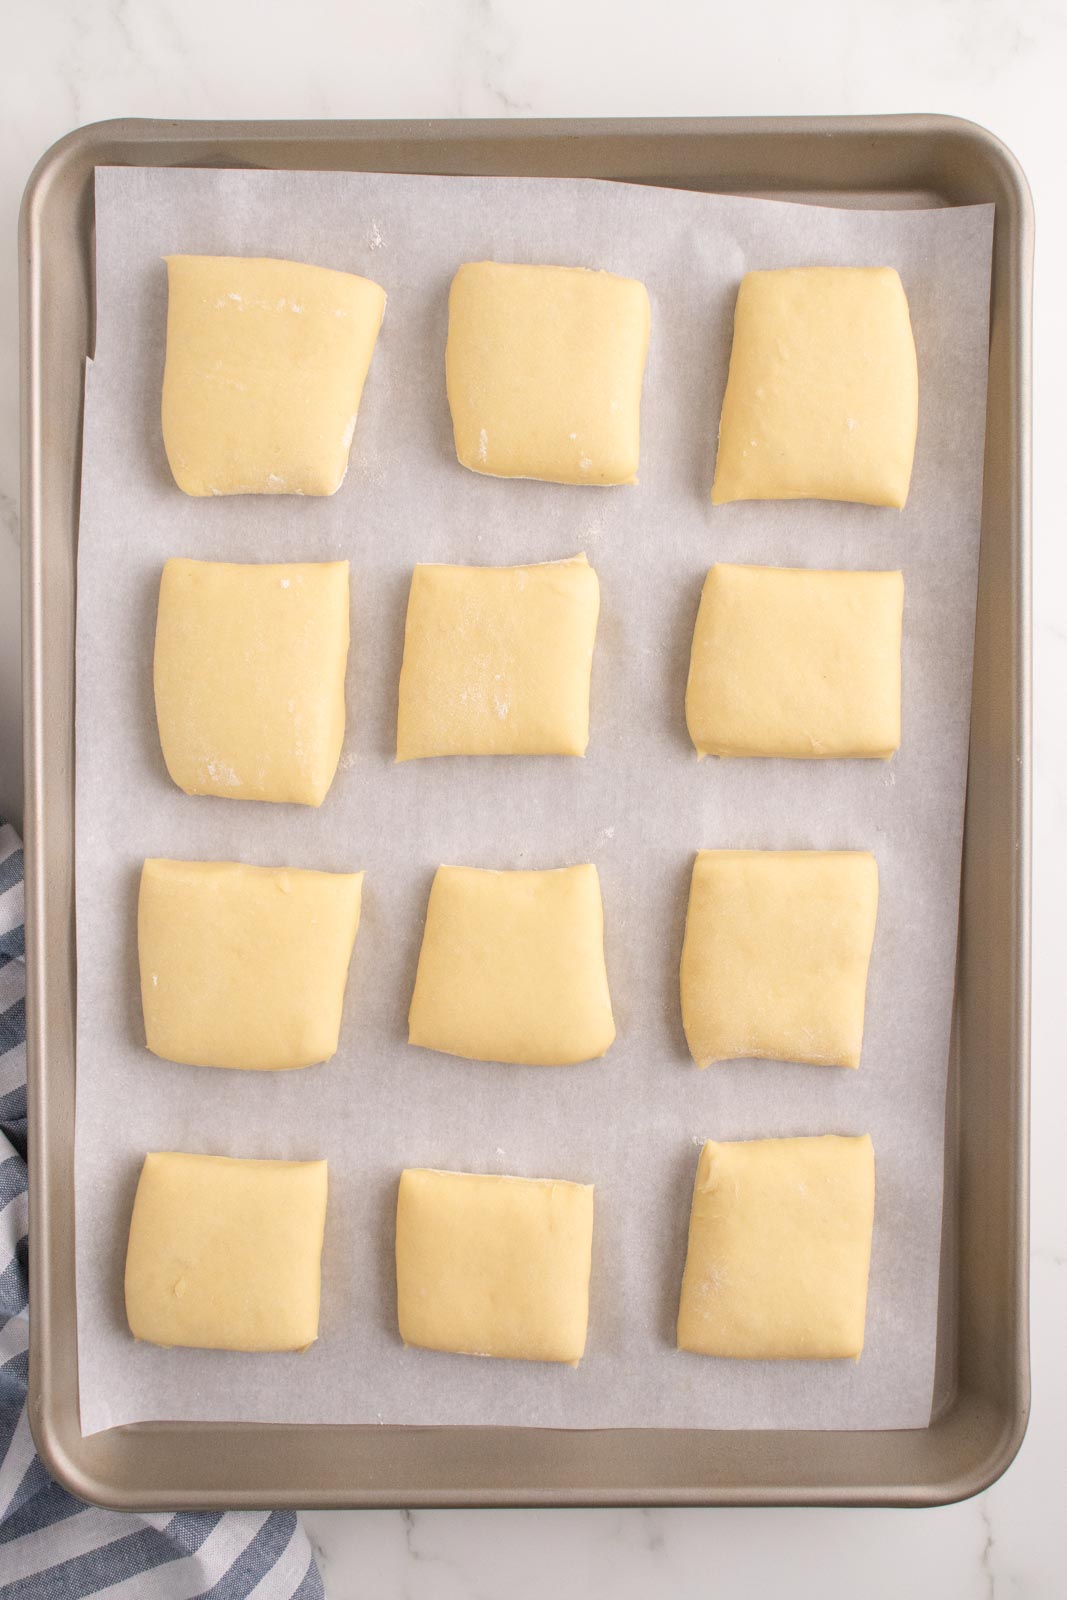 Squares of dough arranged on a baking sheet lined with parchment paper.